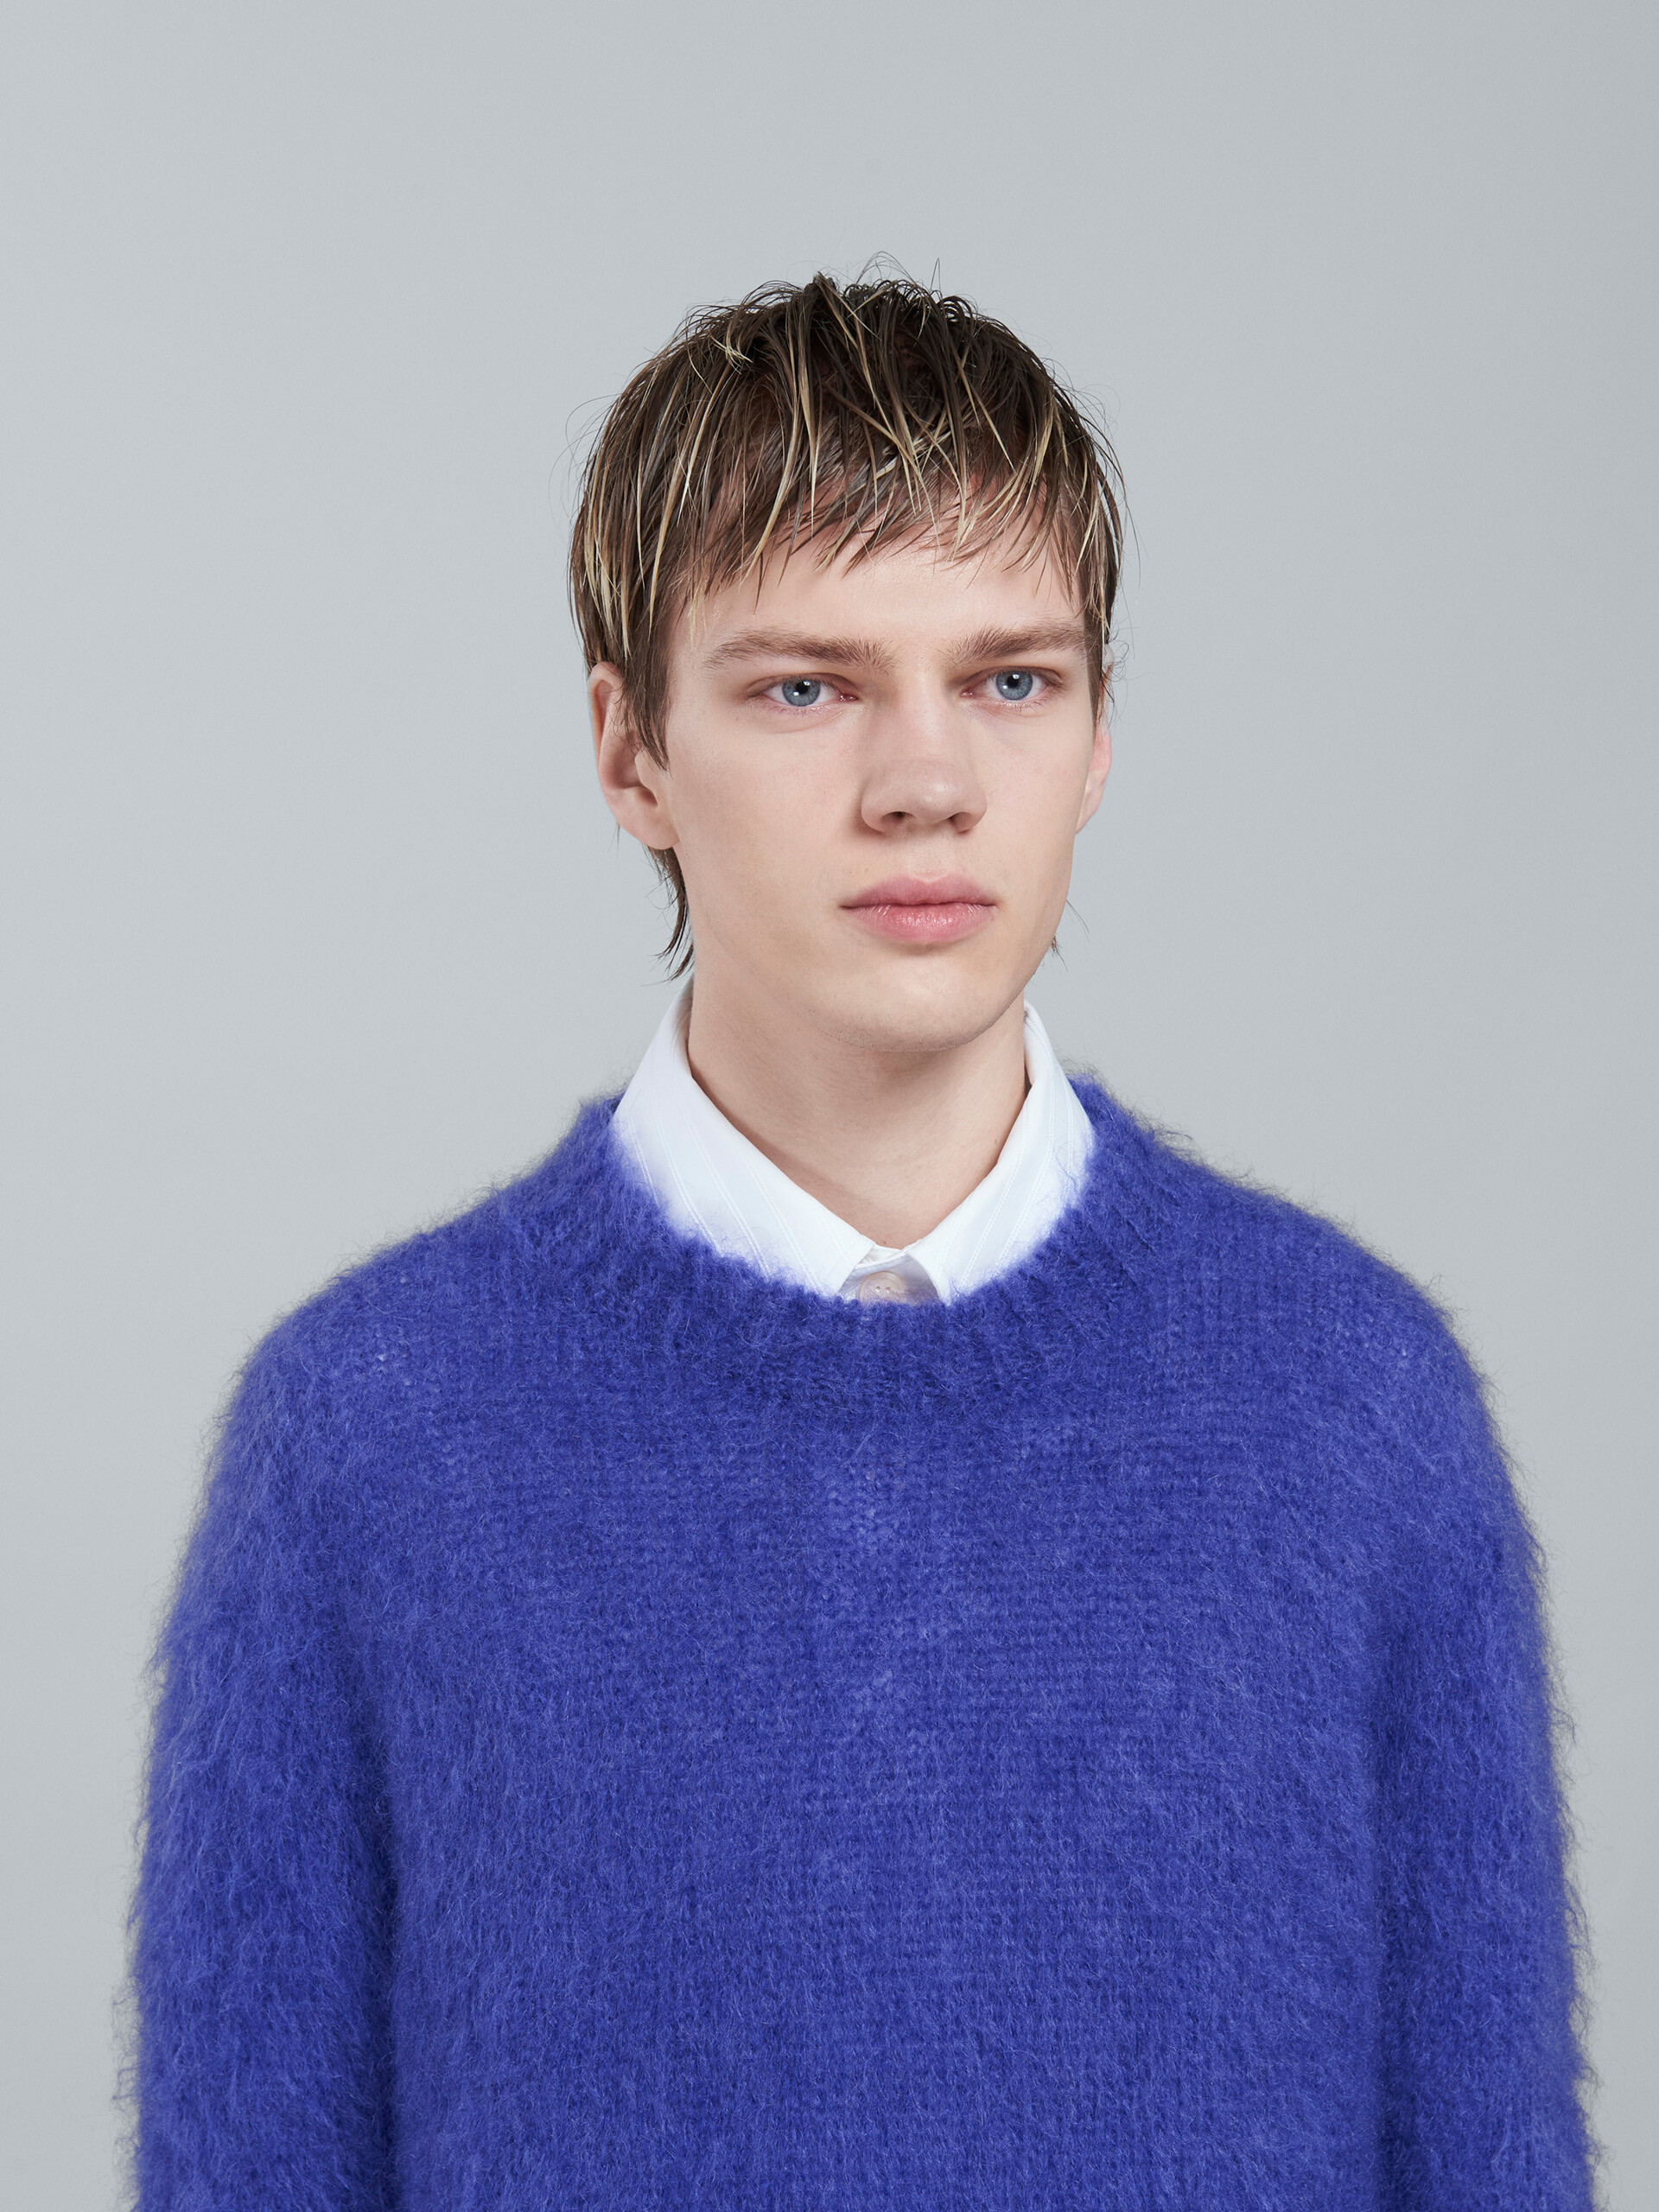 Mohair and wool crewneck sweater - Pullovers - Image 4